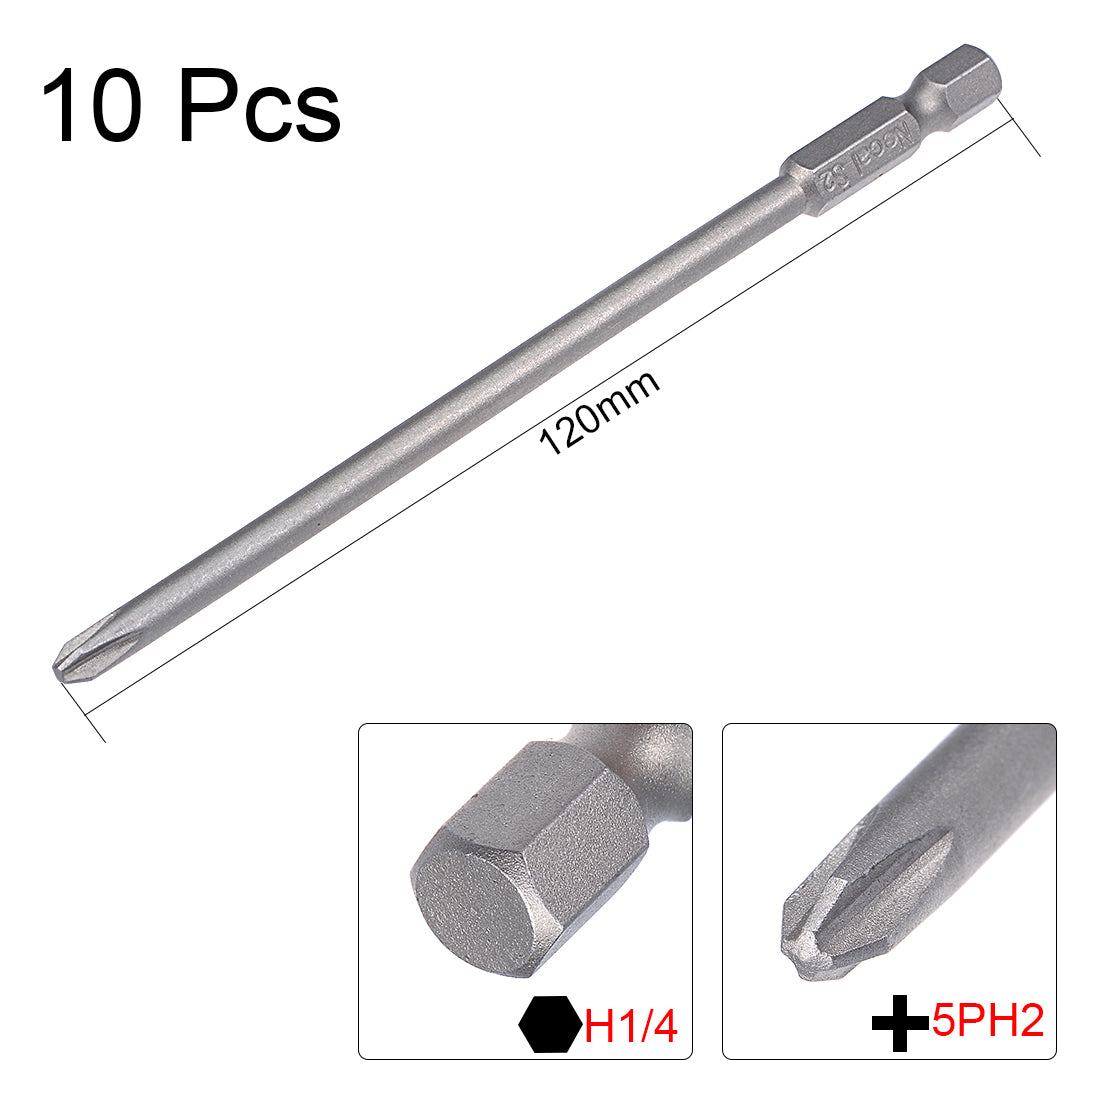 Uxcell Uxcell 10 Pcs H1/4 Shank 120mm Length 5mm Phillips PH2 Magnetic S2 Screwdriver Bits